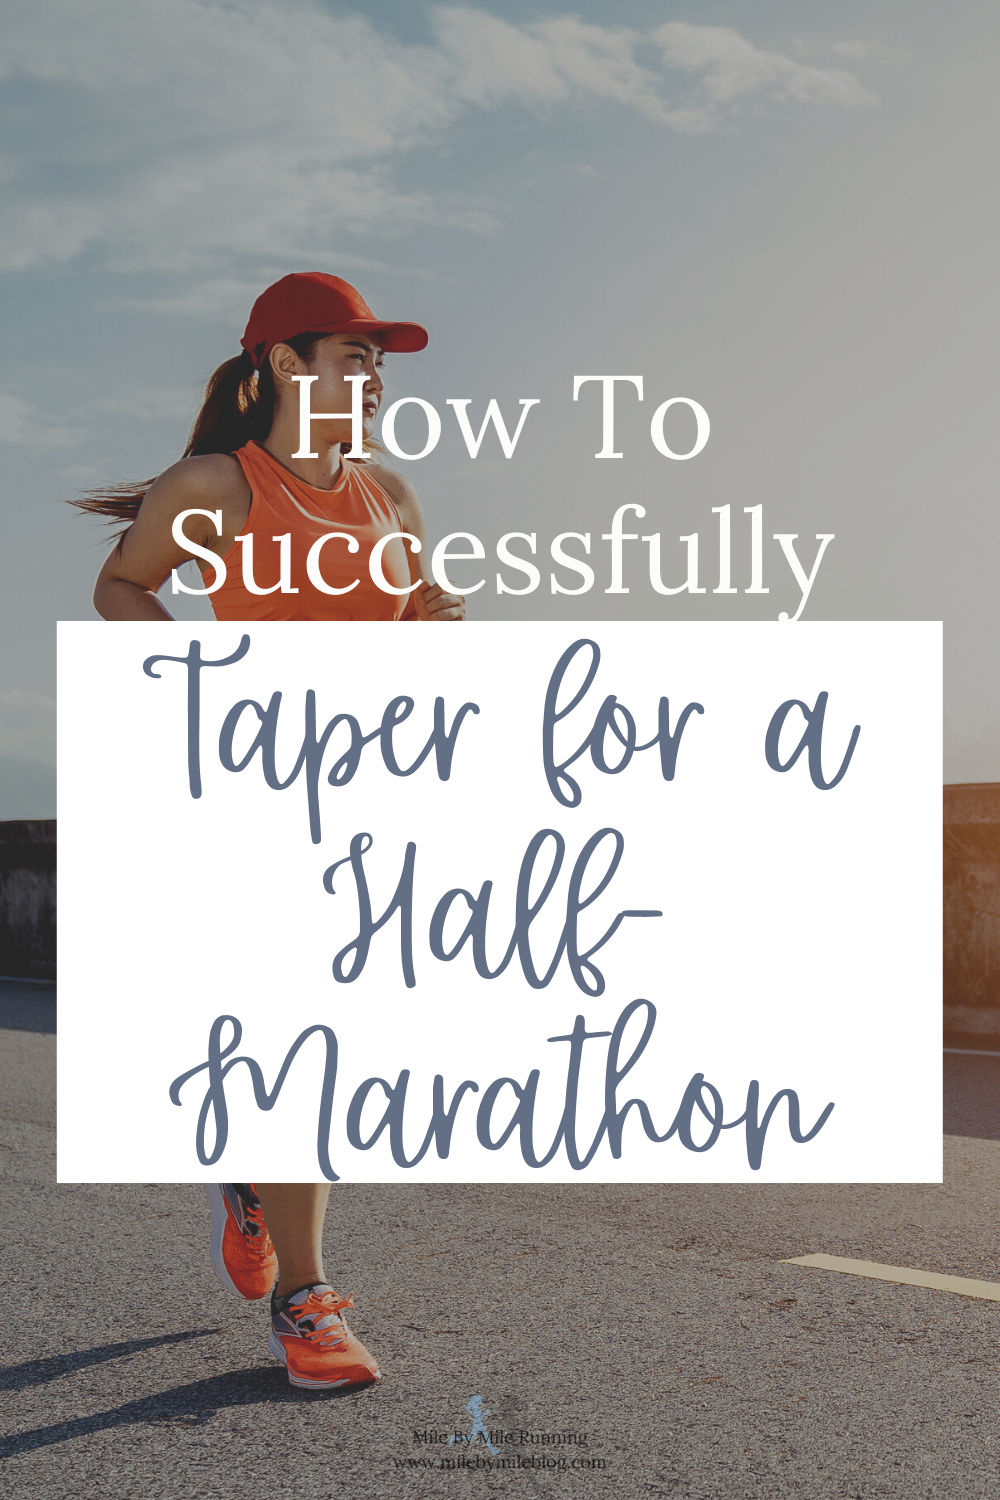 It's that time of year when we are getting closer to spring goal races. Many runners are gearing up for a half-marathon in April or May, which means it's almost taper time! As I have started to work with some of my athletes on preparing for their taper, I wanted to share some ways to successfully taper for a half-marathon.